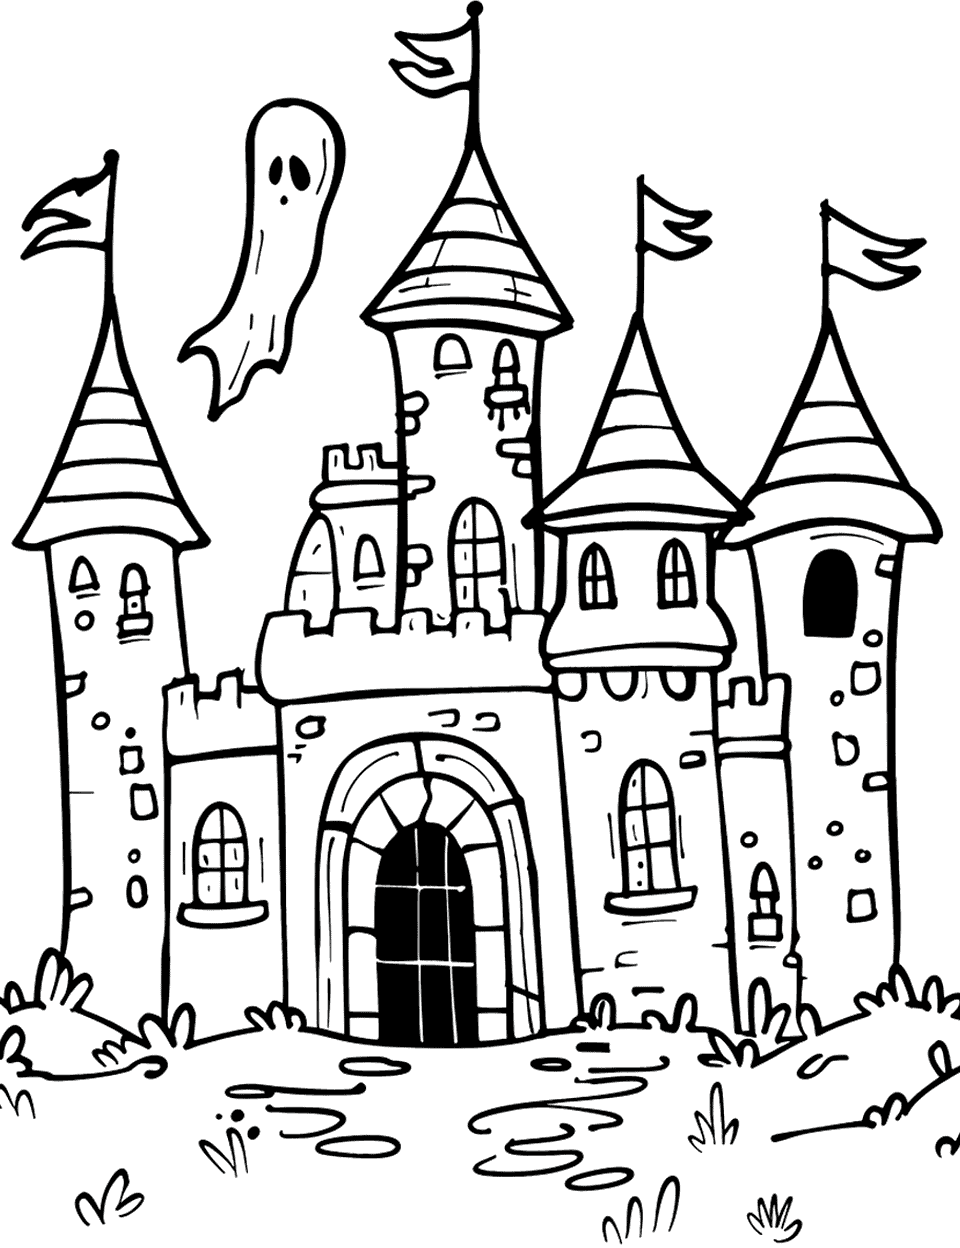 Haunted Castle Coloring Page - A spooky, haunted castle with a single ghost floating in front.